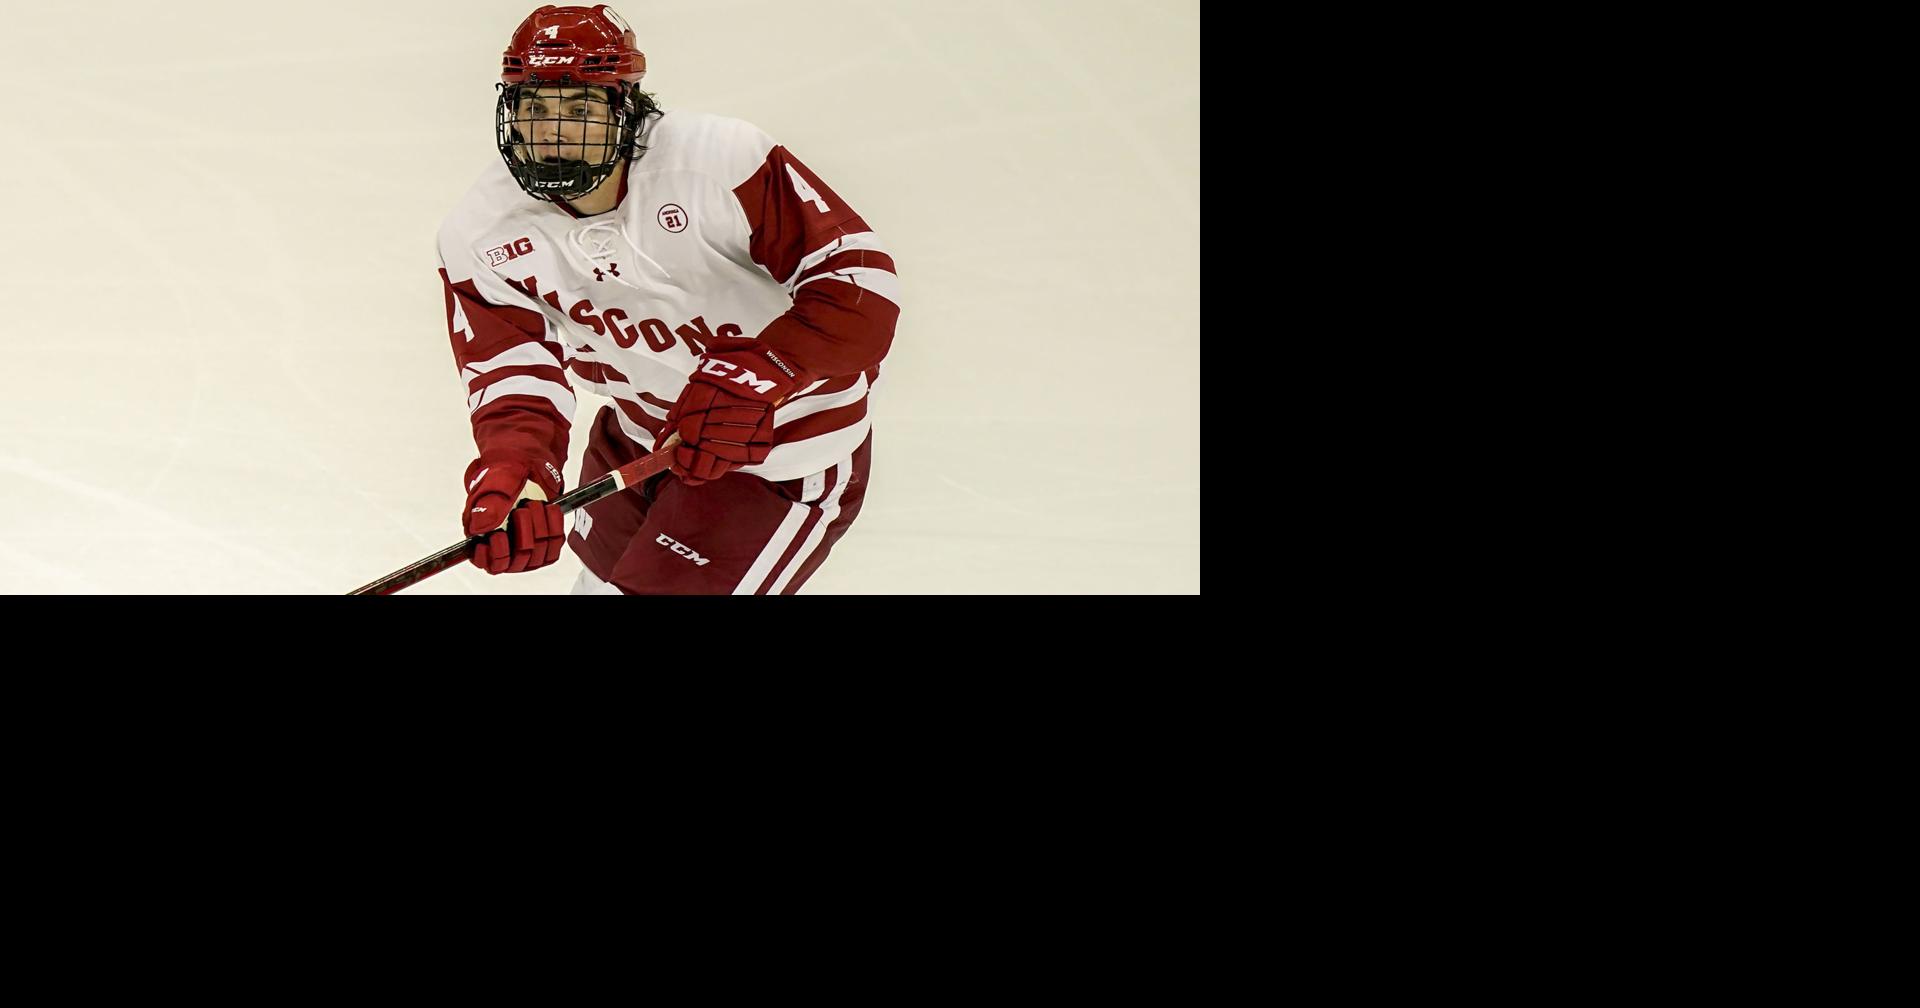 Wisconsin Badgers' Dylan Holloway named to Canada's World Juniors selection  camp